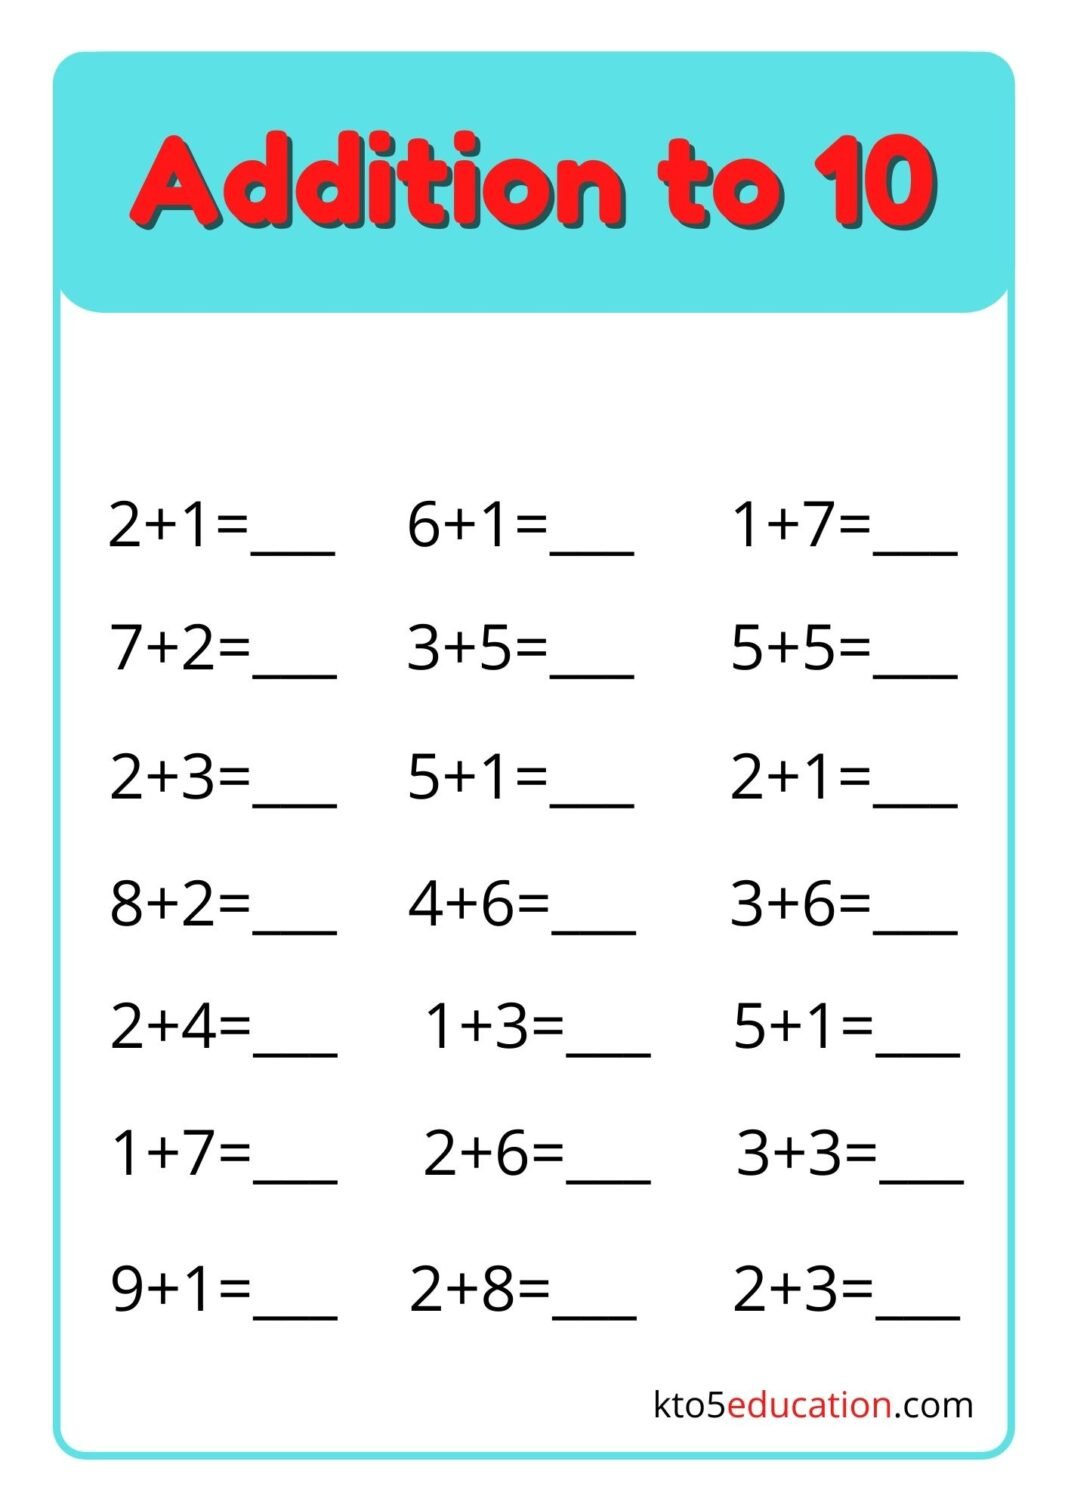 Addition Up To 10 Worksheets Kto5Education